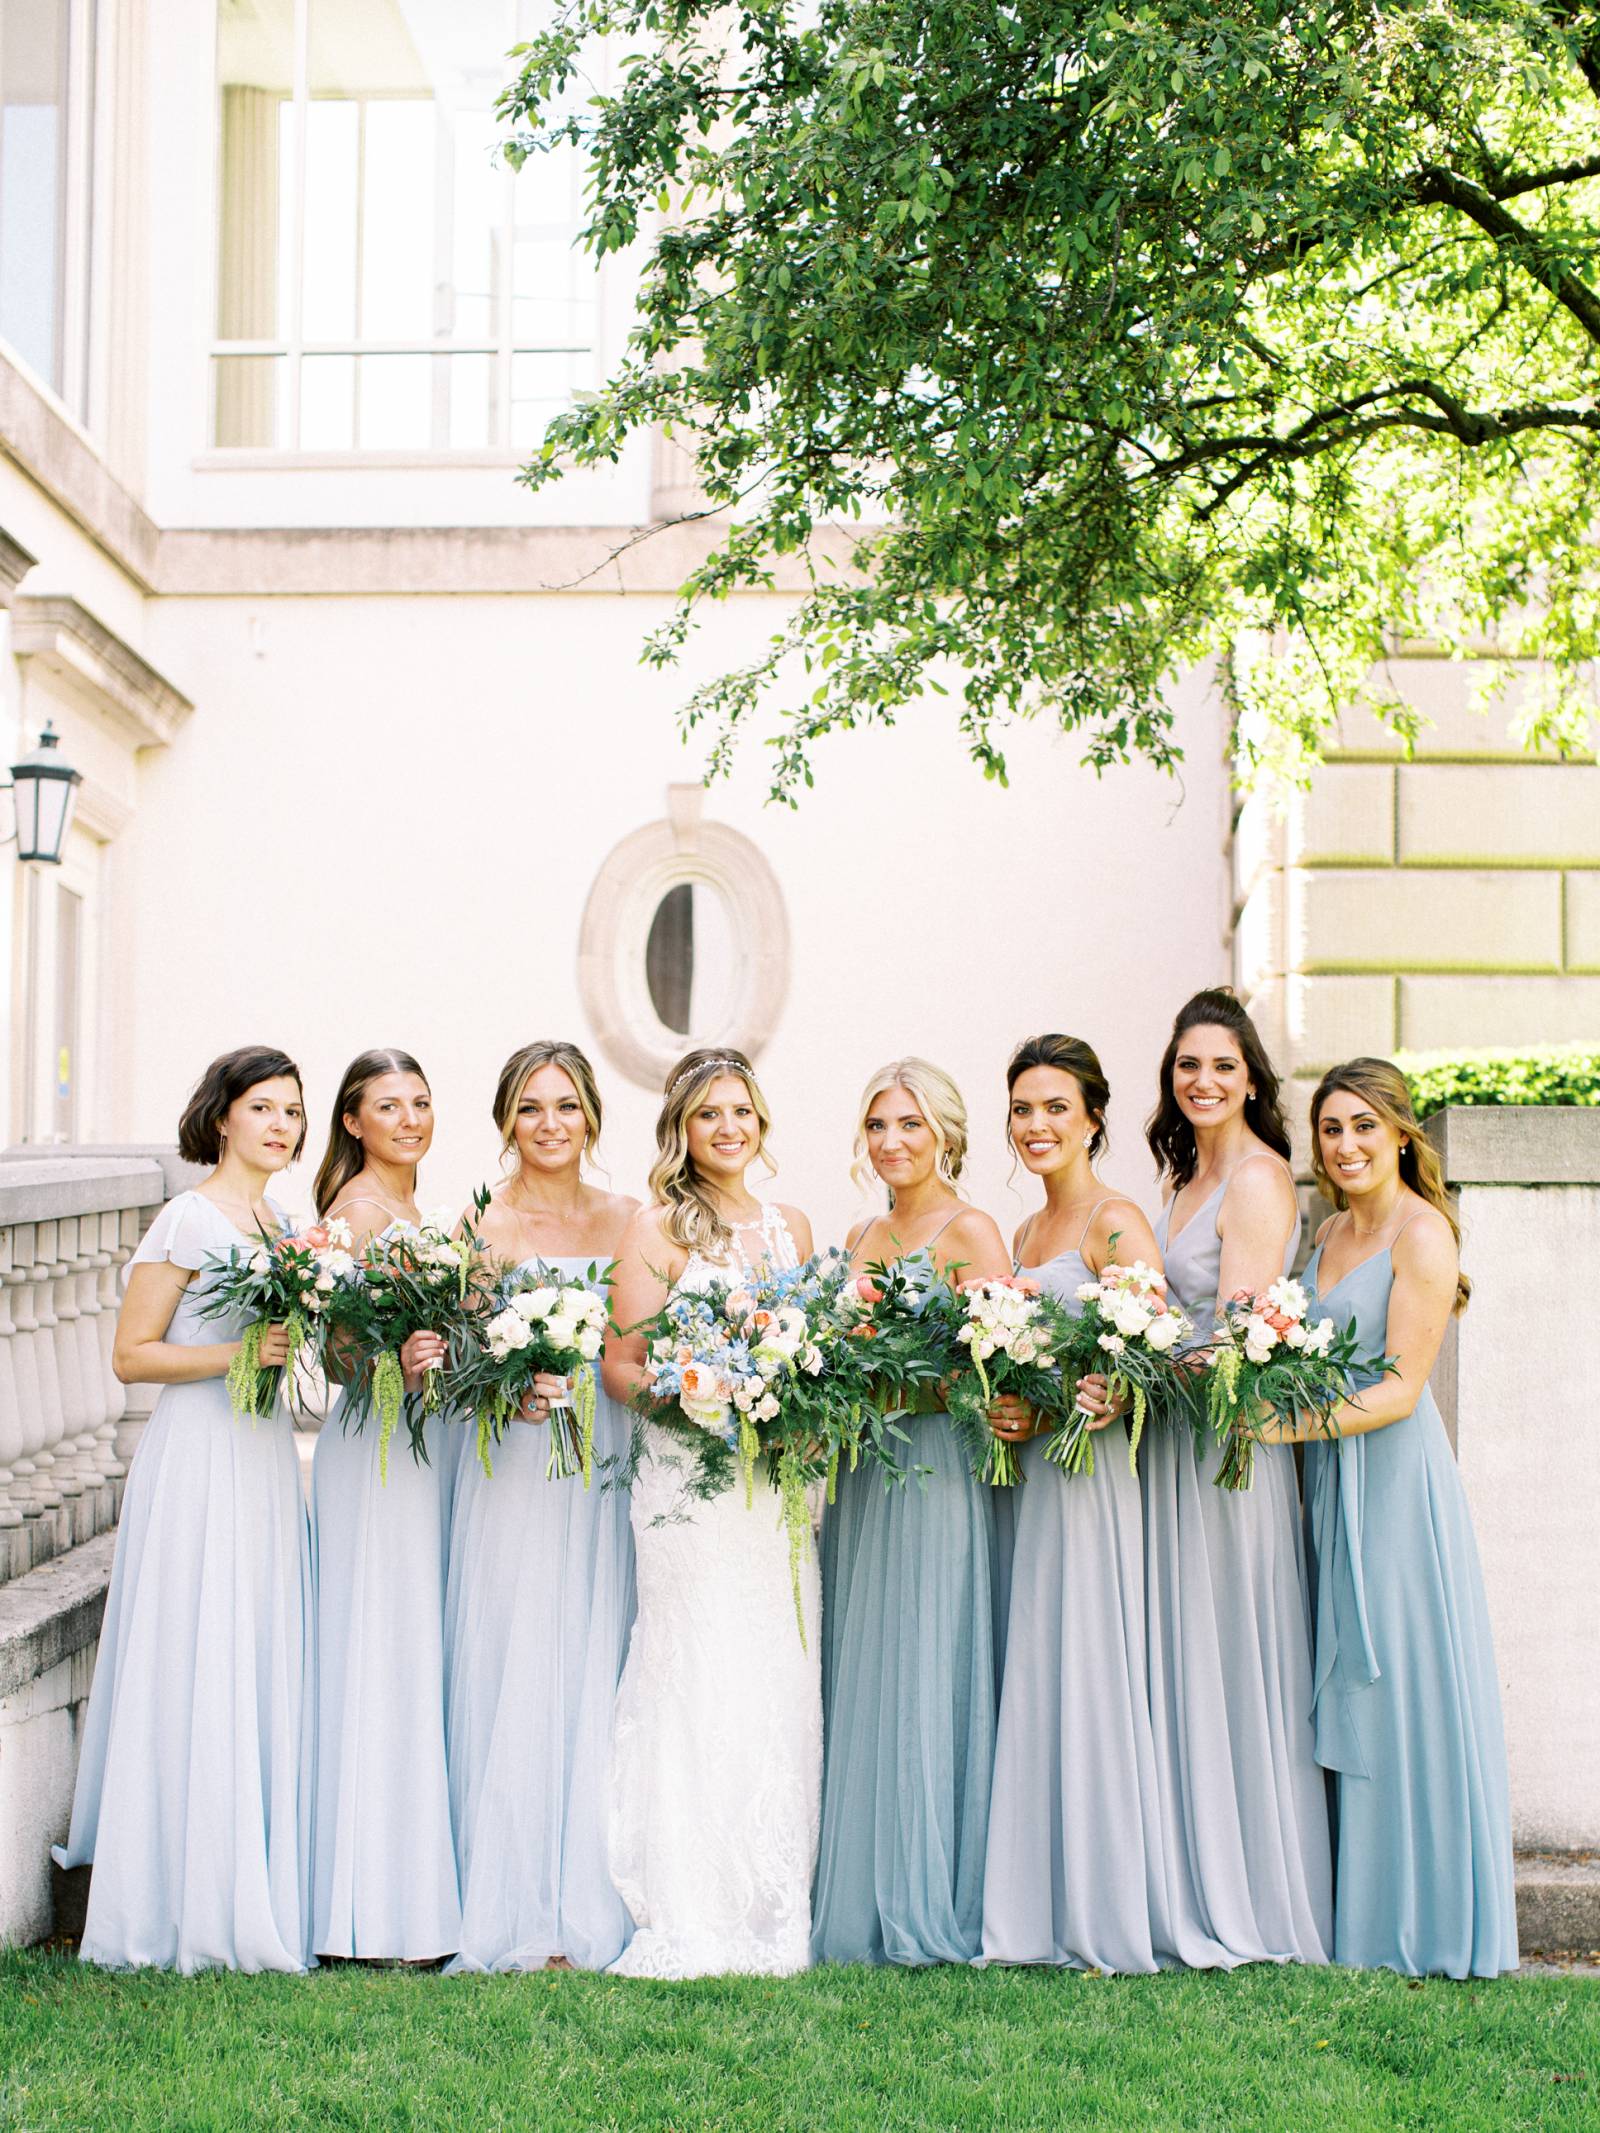 A Michigan wedding blending traditional elegance with modern touches ...